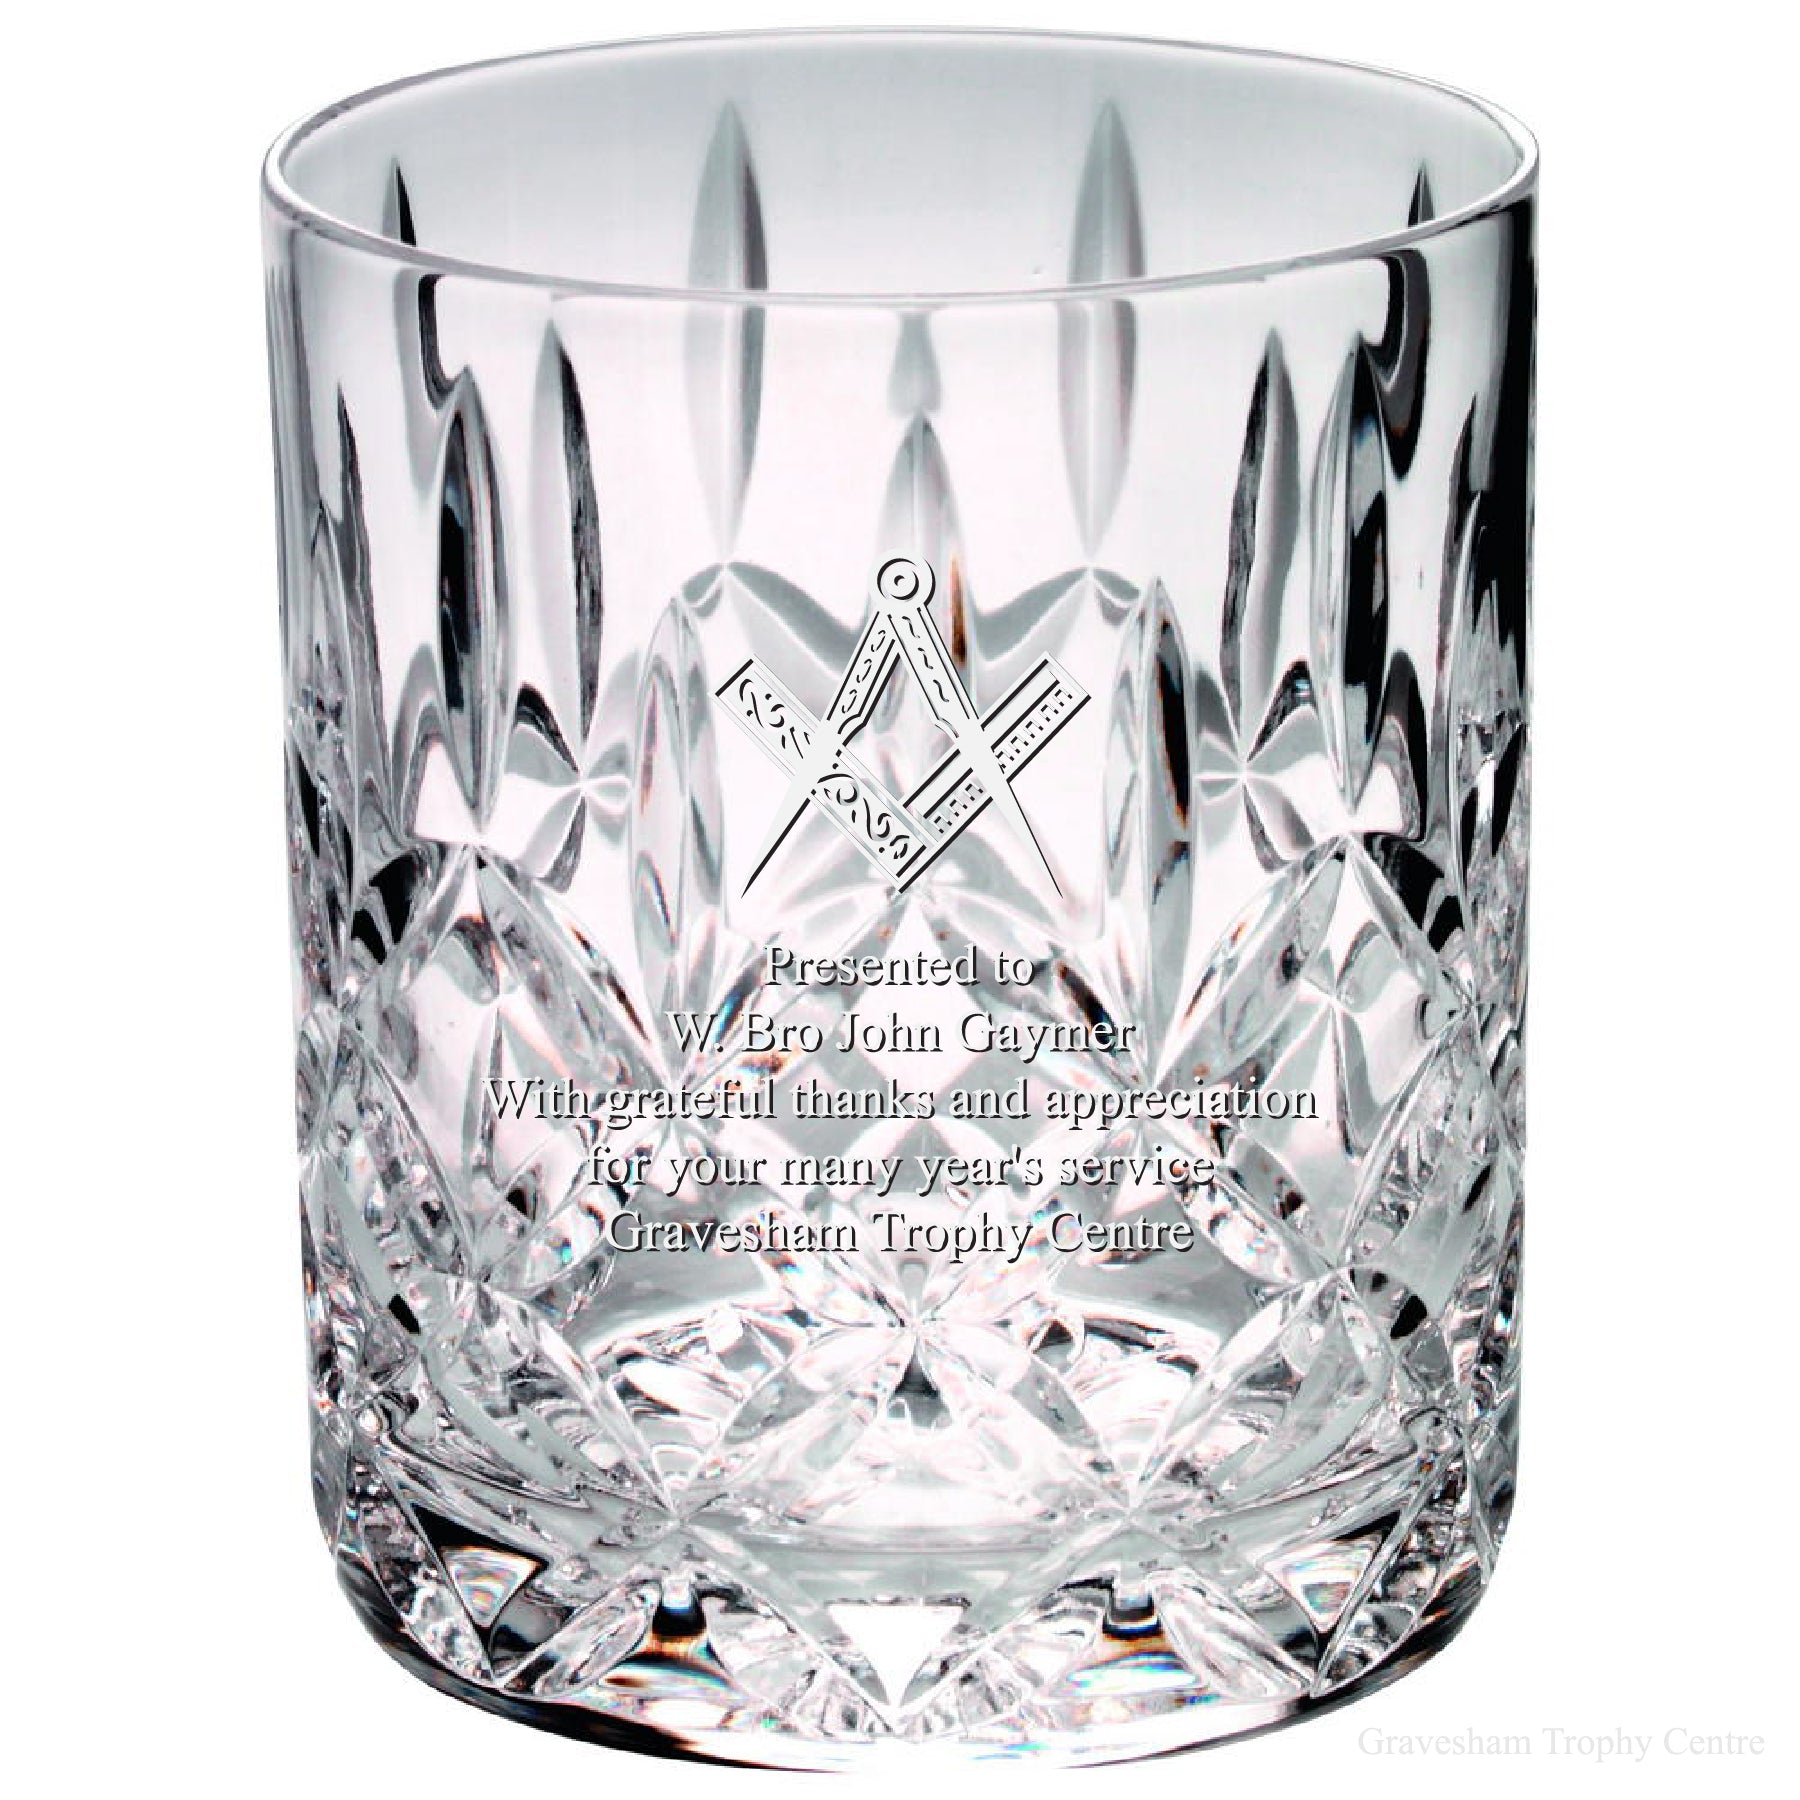 Freemasons Engraved 24% Lead Cut Crystal Whisky Glass With Masonic Design. Satin Gift Box Included.